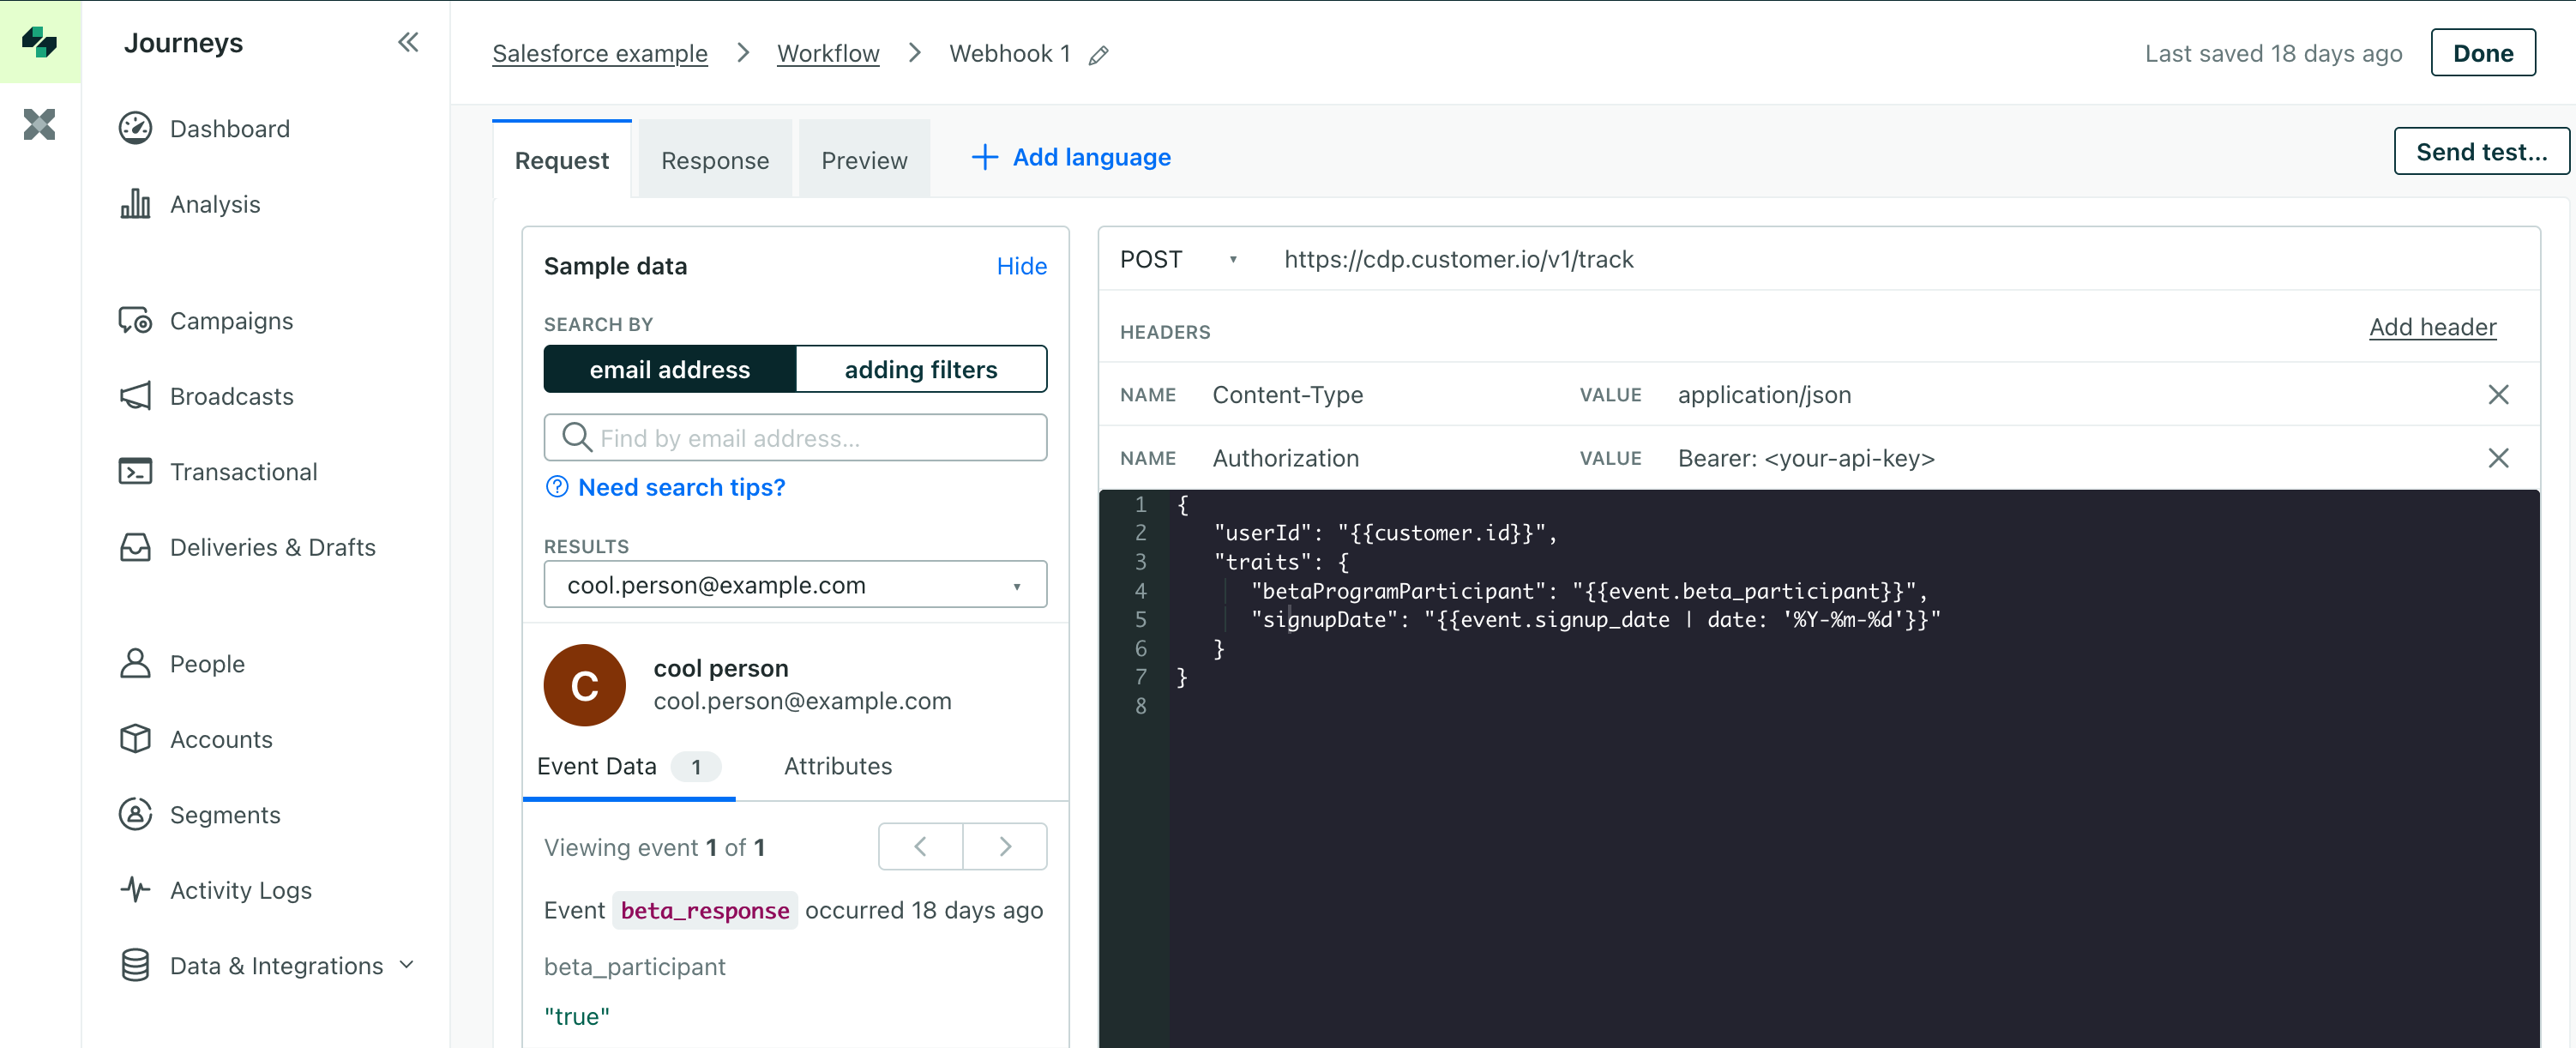 set up your webhook to send a track call to the data pipelines API. We'll forward this data to your Salesforce destination.